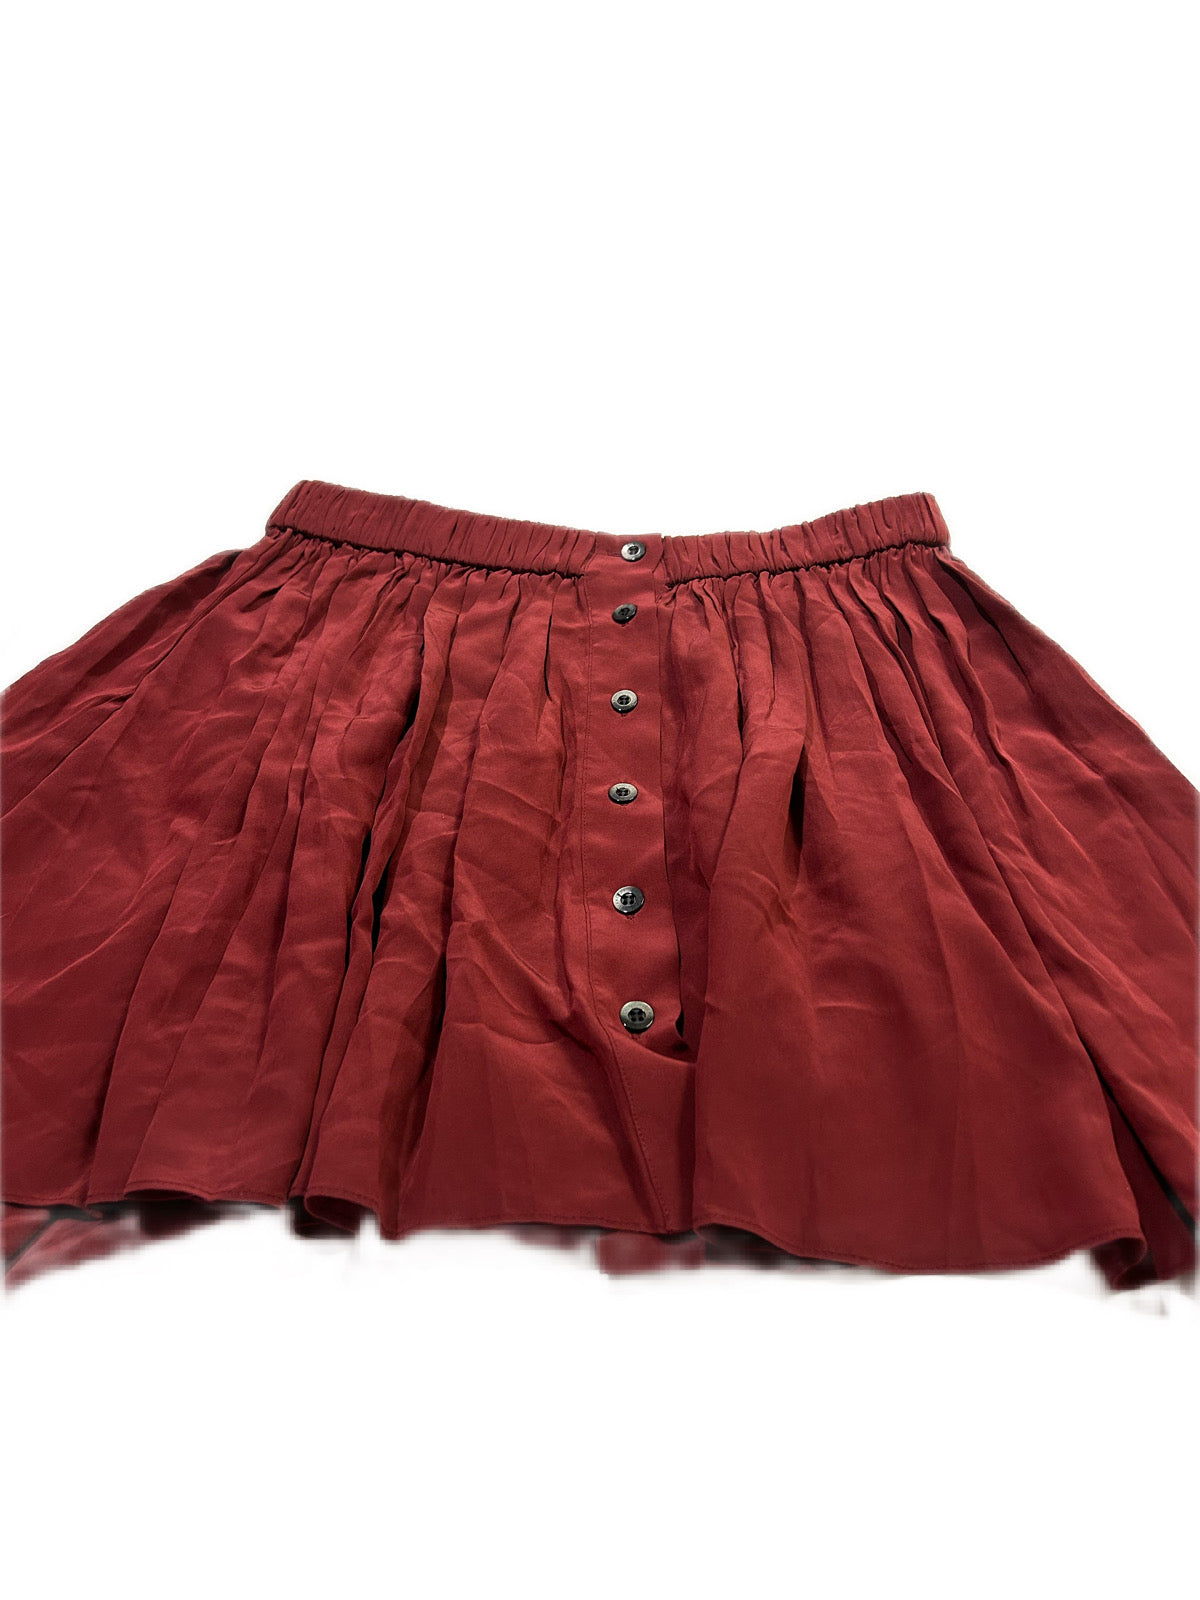 Skirt Thakoon Addition for Barney’s New York Co-Op size L